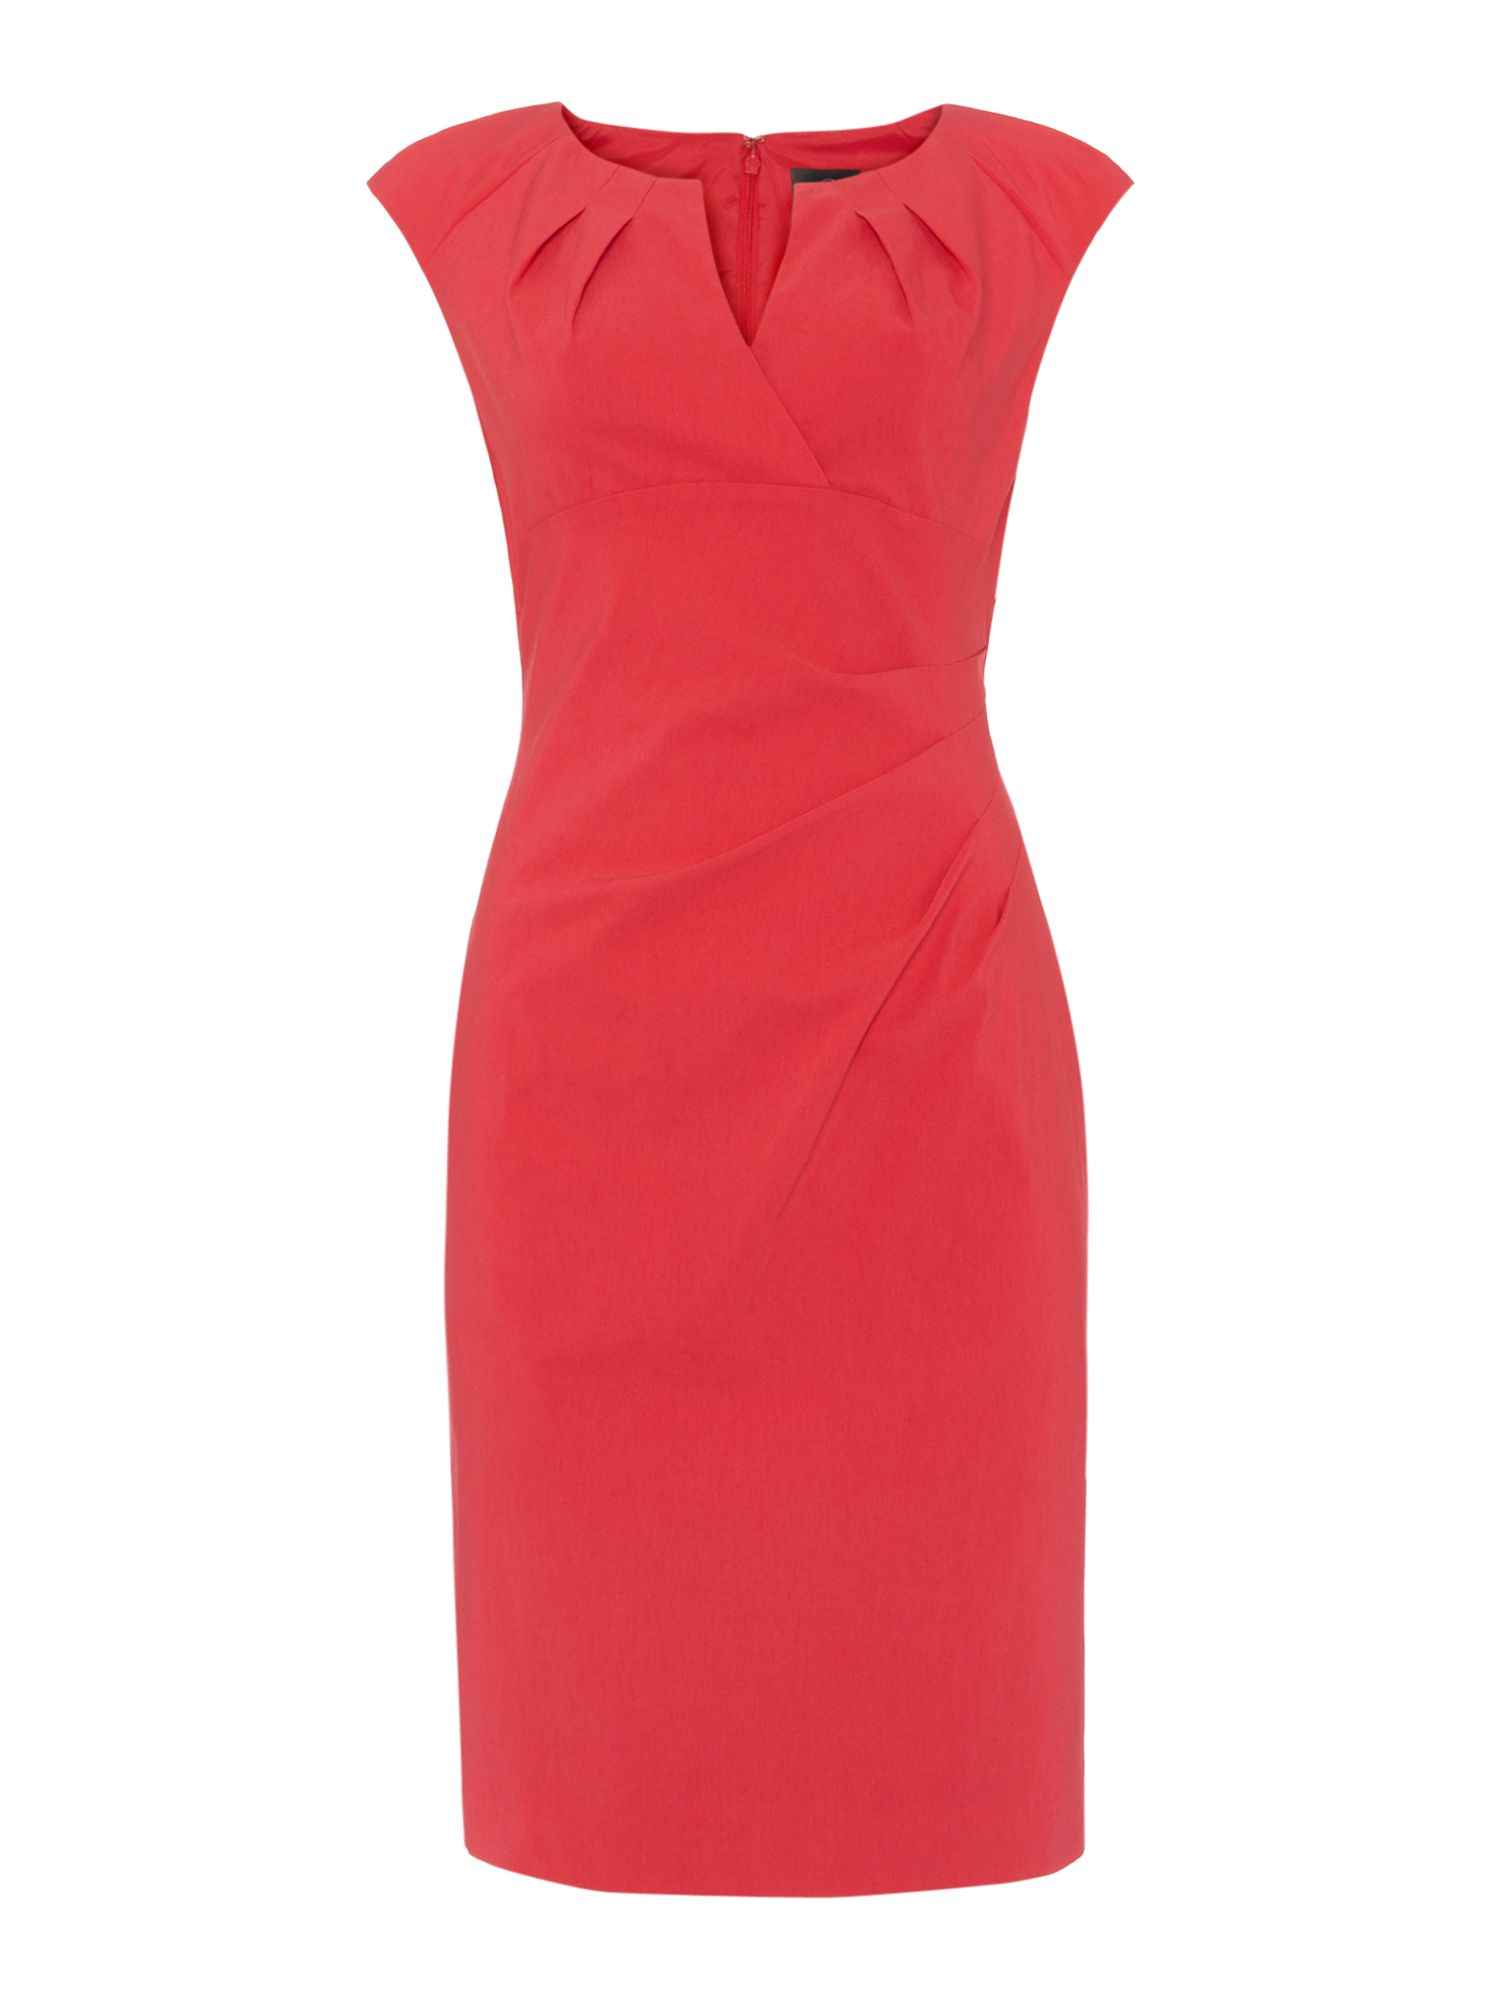 Adrianna Papell Side Pleat Shift Dress in Red (Geranium) | Lyst